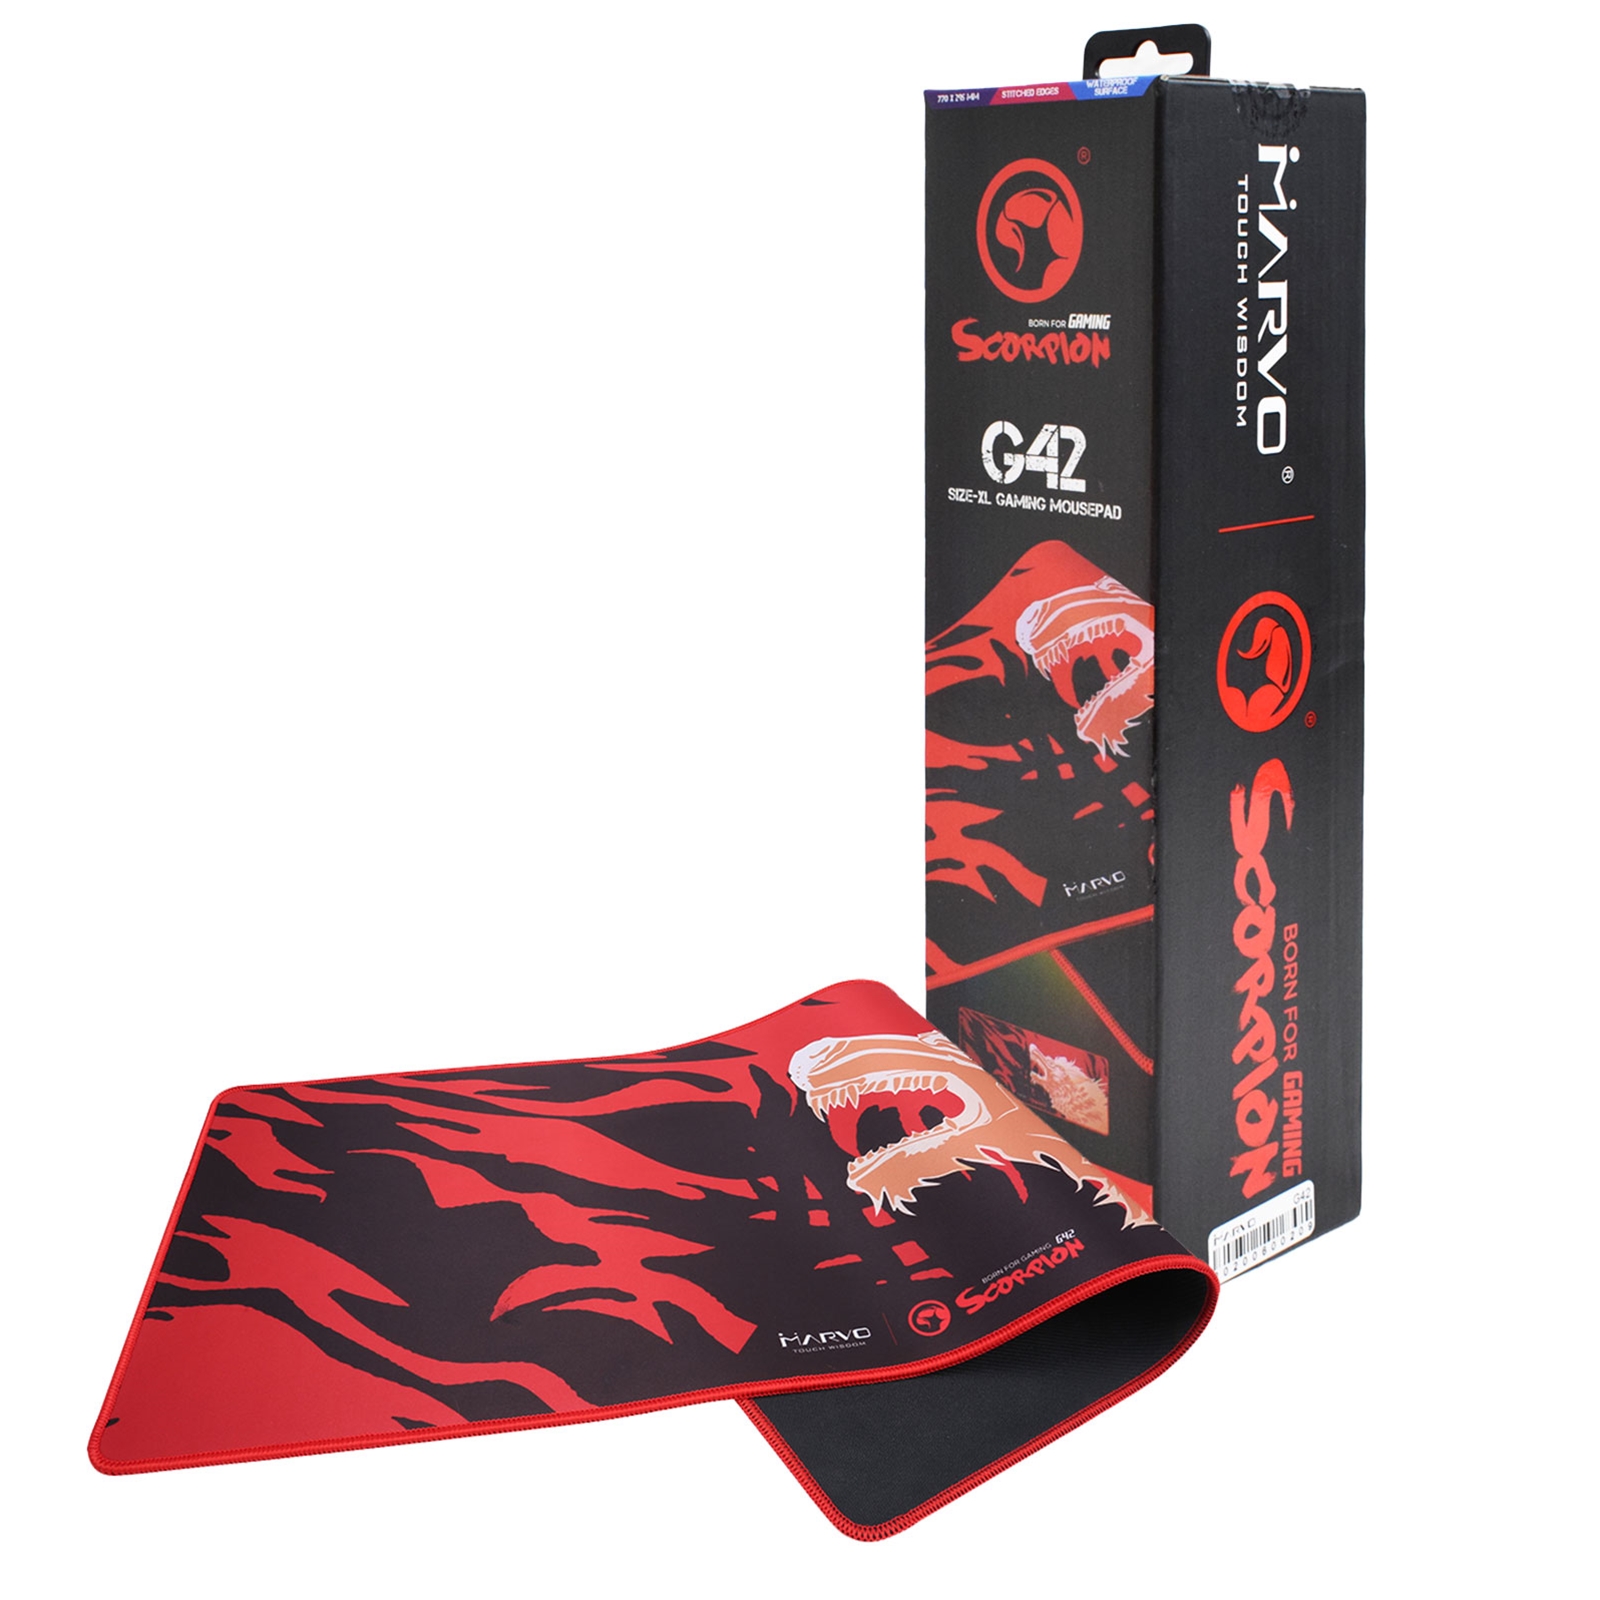 Marvo G42 Gaming Mouse Pad, XL 770x295x3mm, Waterproof, Smooth Surface for Optimal Gaming, Improves Precision and Speed, with Non-Slip Rubber Base and Stitched Edges, Red and Black